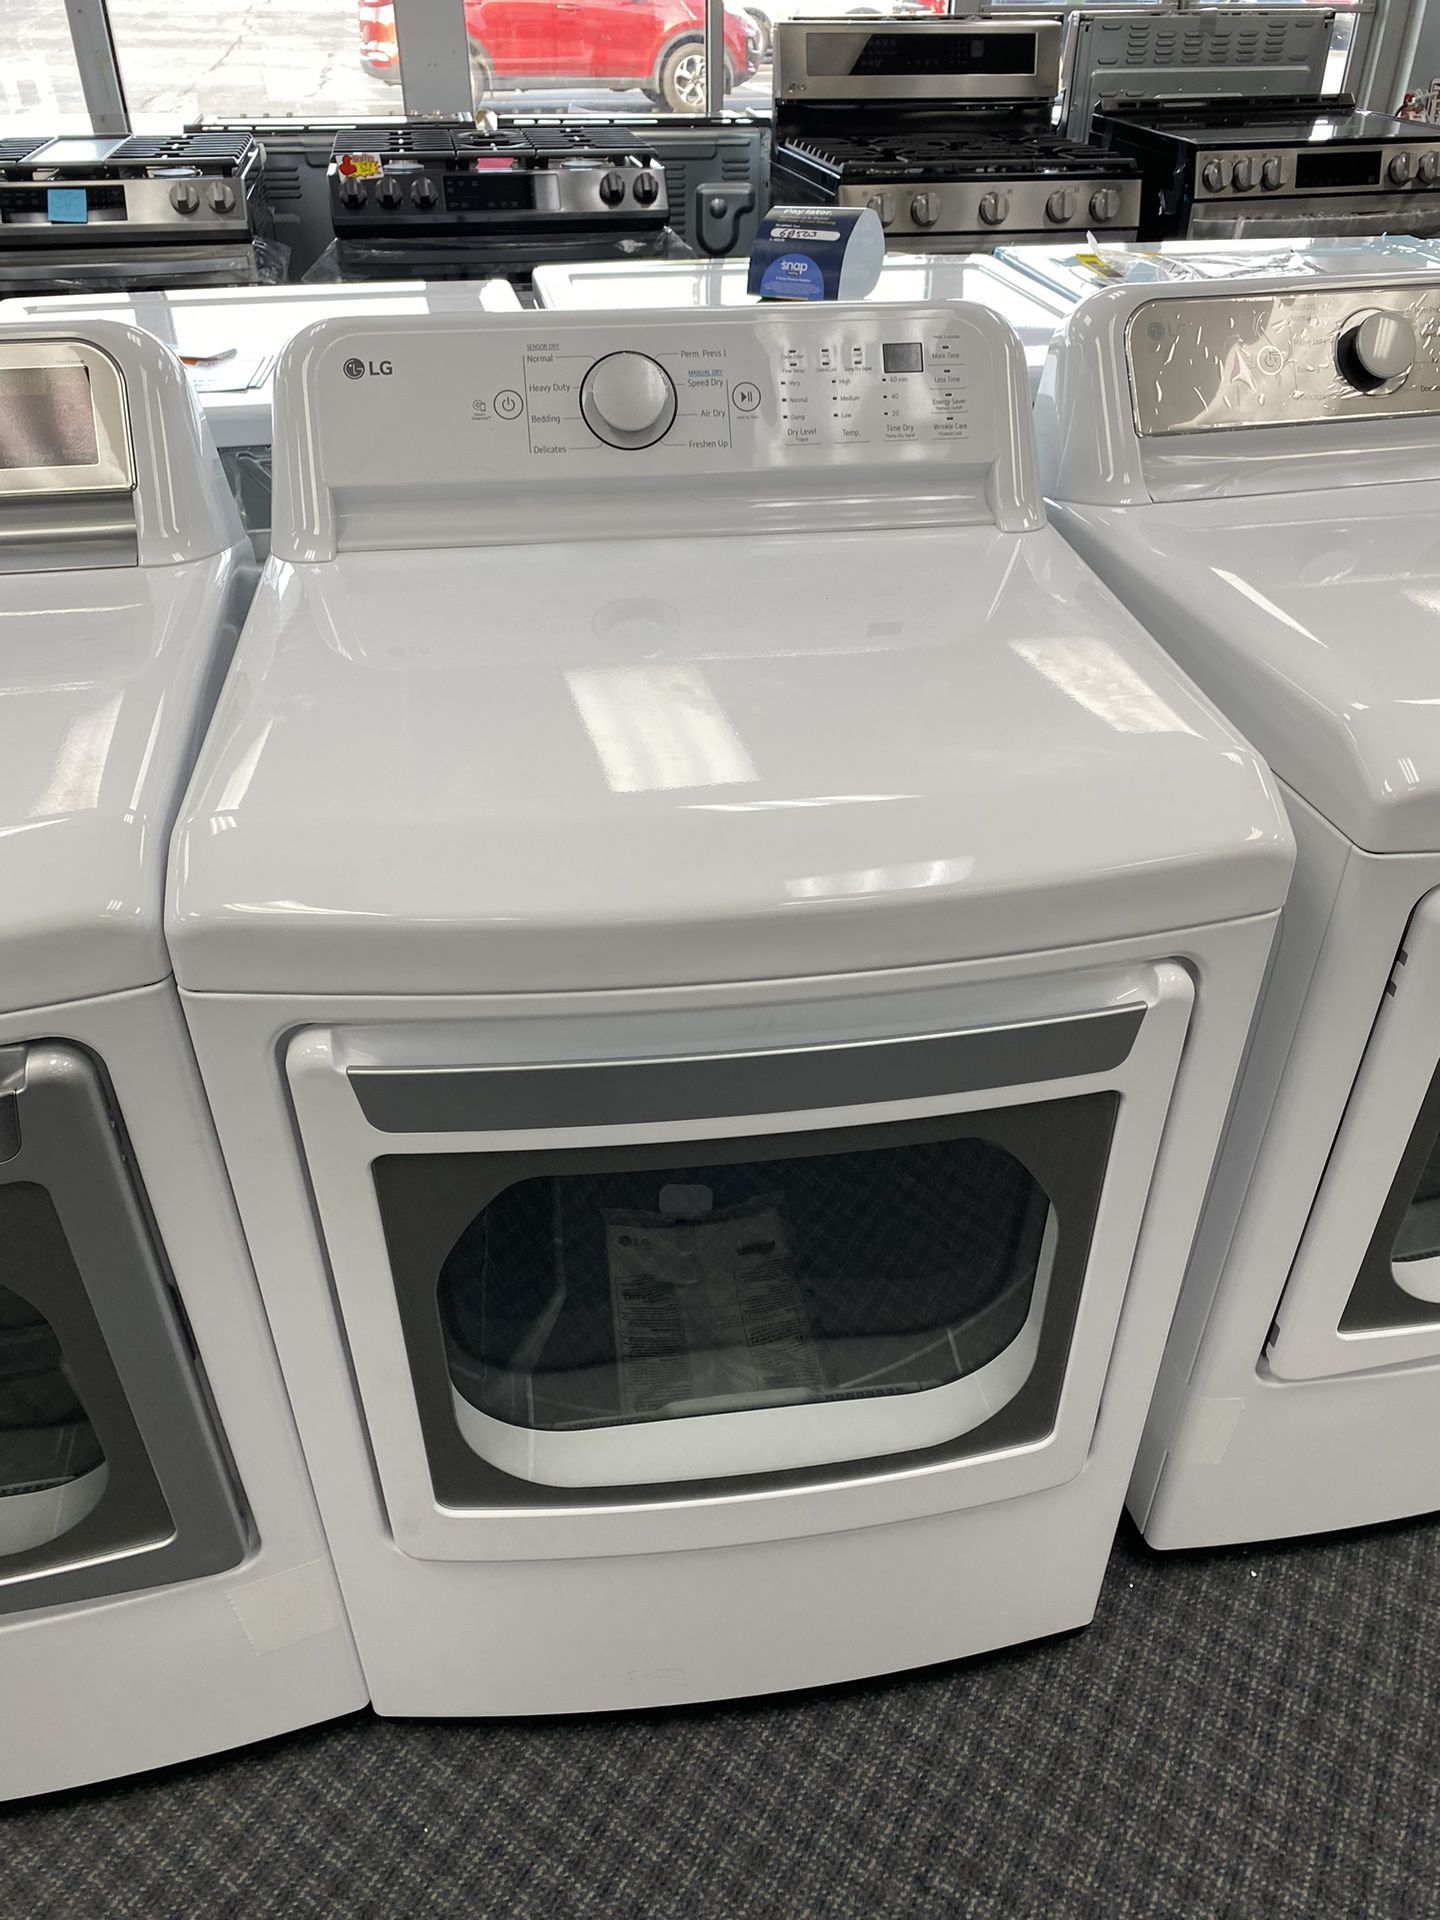 Move Out Sale - New LG Dryer - Price Reduced